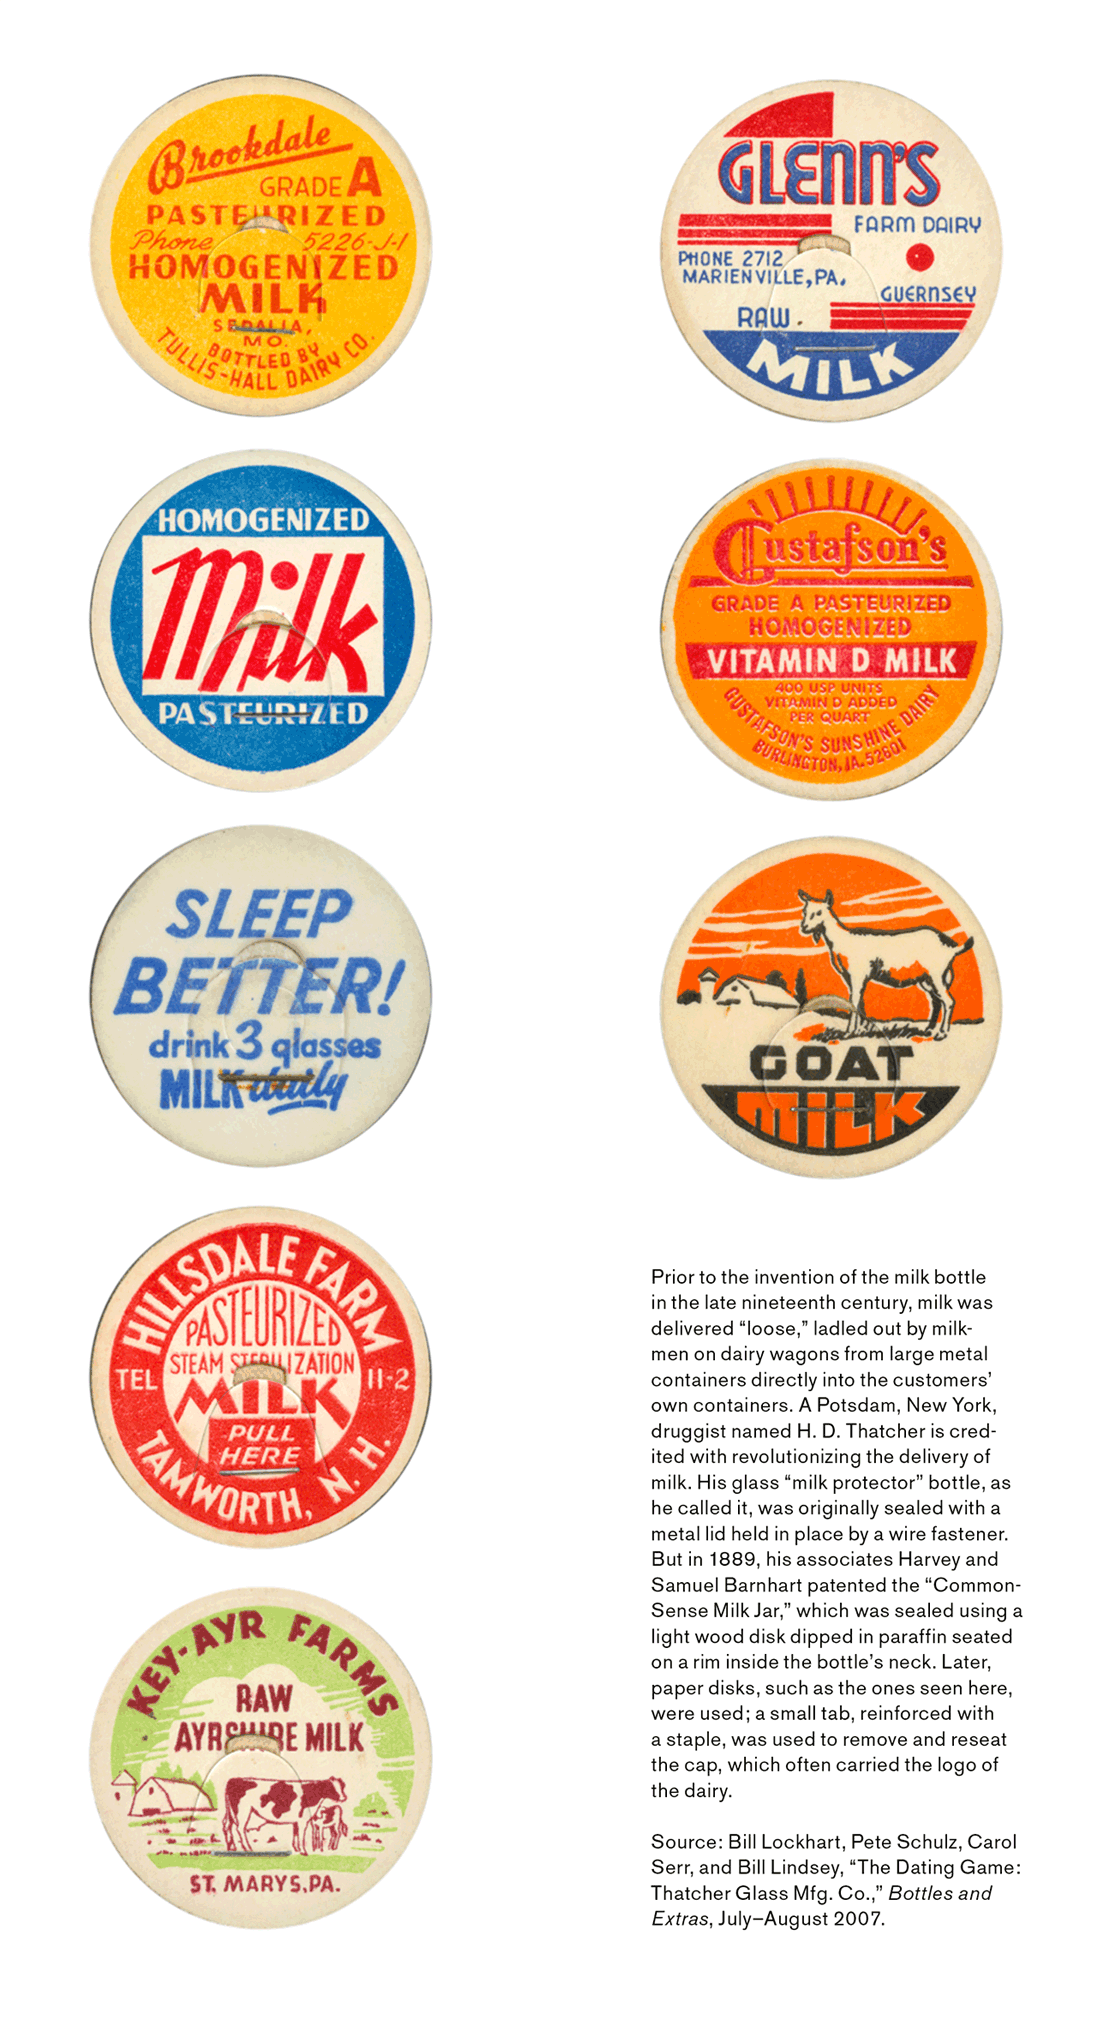 A bookmark, the front of which features five different paper disk designs for milk bottle lids. The back of the bookmark features two more disk designs, and text that reads, “Prior to the invention of the milk bottle in the late nineteenth century, milk was delivered ‘loose,’ ladled out by milkmen on dairy wagons directly into the customers’ own containers. A Potsdam, New York, druggist named H.D. Thatcher is credited with revolutionizing the delivery of milk. His glass “milk protector” bottle, as he called it, was originally sealed with a metal lid held in place by a wire fastener. But in eighteen eighty nine, his associates Harvey and Samuel Barnhart patented the ‘Common-Sense Milk Jar,’ which was sealed using a light wood disk dipped in paraffin seated on a rim inside the bottle’s neck. Later, paper disks, such as the ones seen here, were used: a small tab, reinforced with a staple, was used to remove and reseat the cap, which often carried the logo of the dairy.”